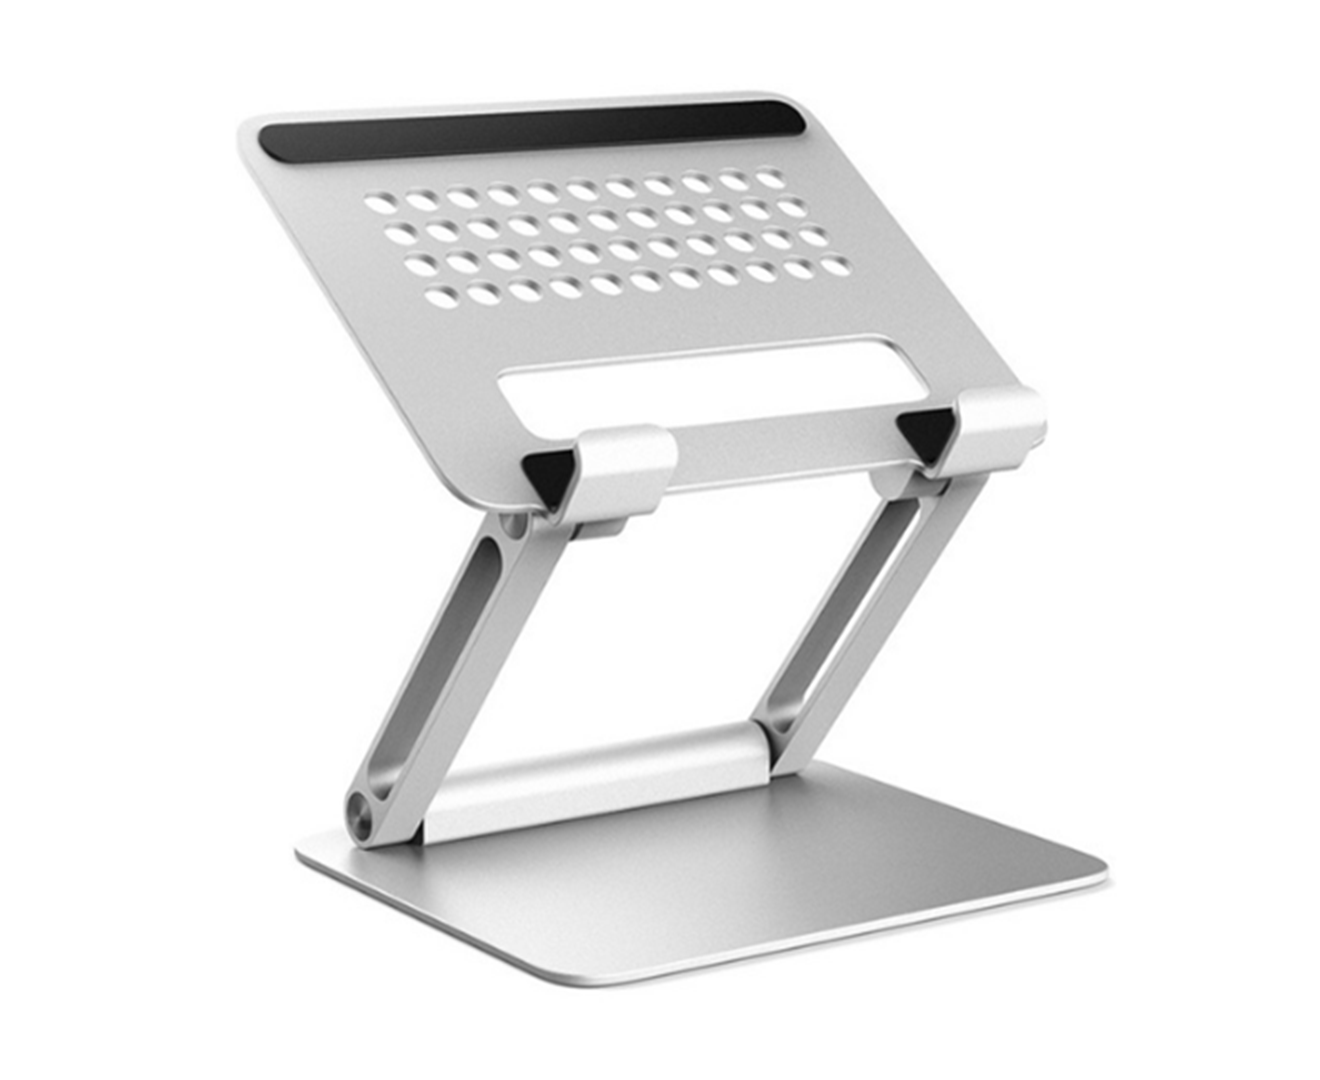 13.3 Inch Mobile Phone Tablet Computer Stand Aluminum Alloy Folding Liftable Desktop Ipad Display Stand